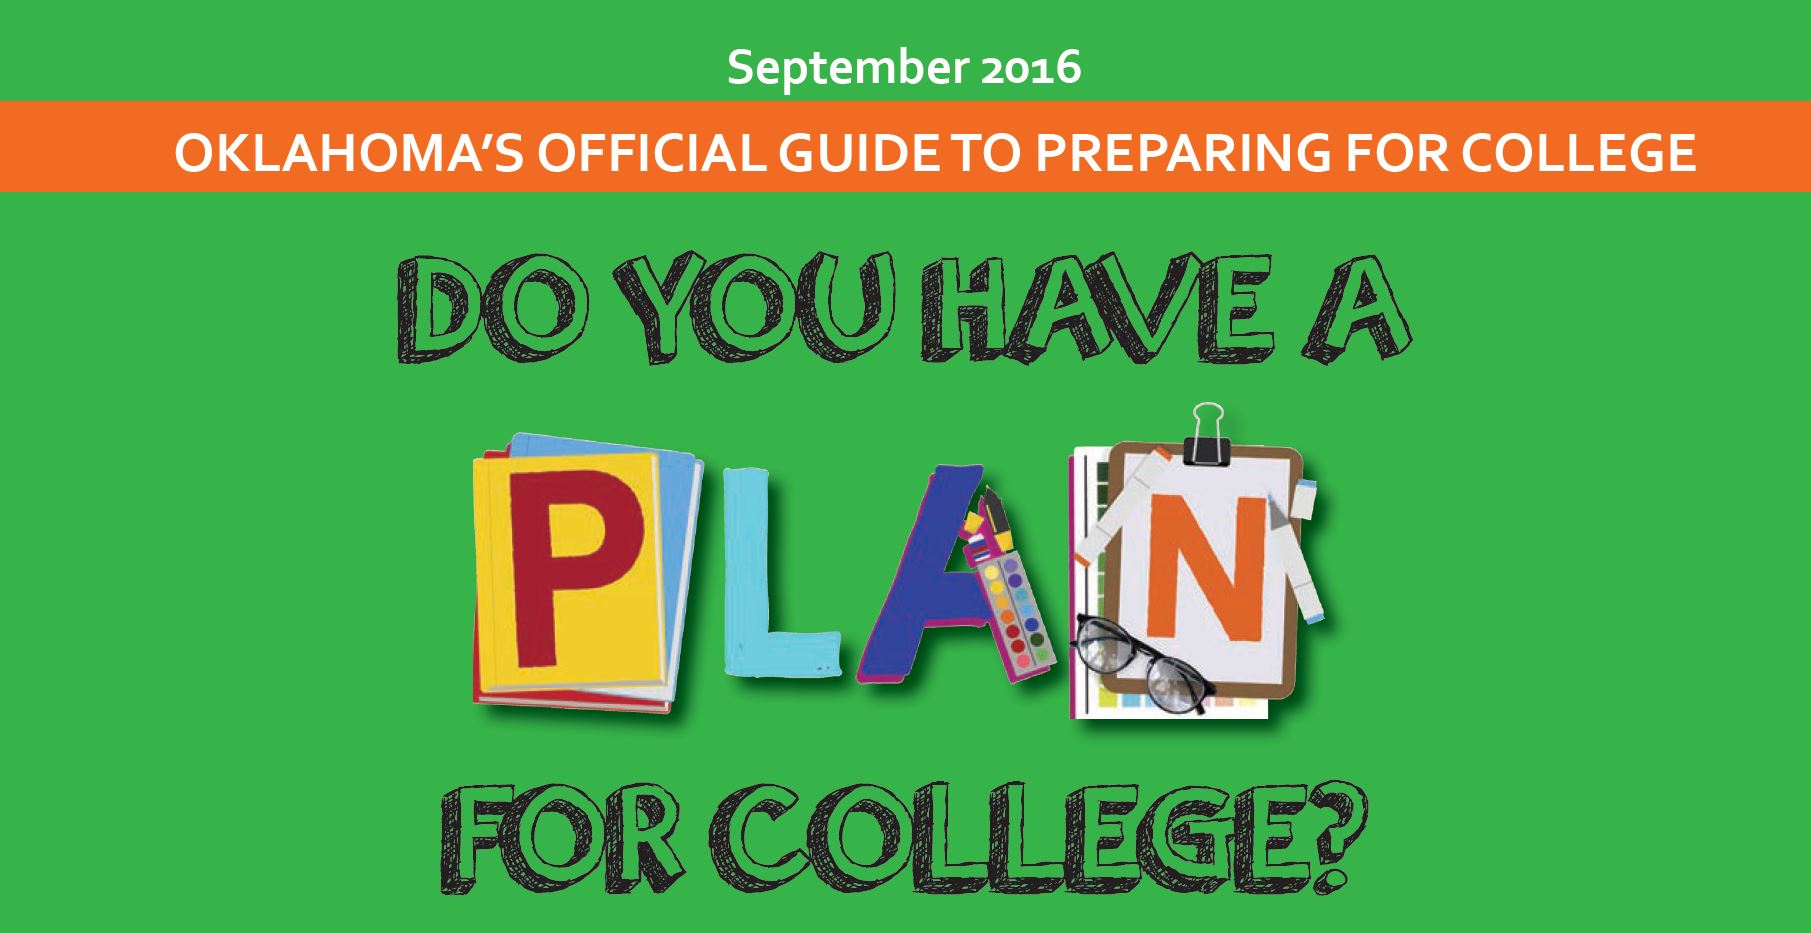 plan for college